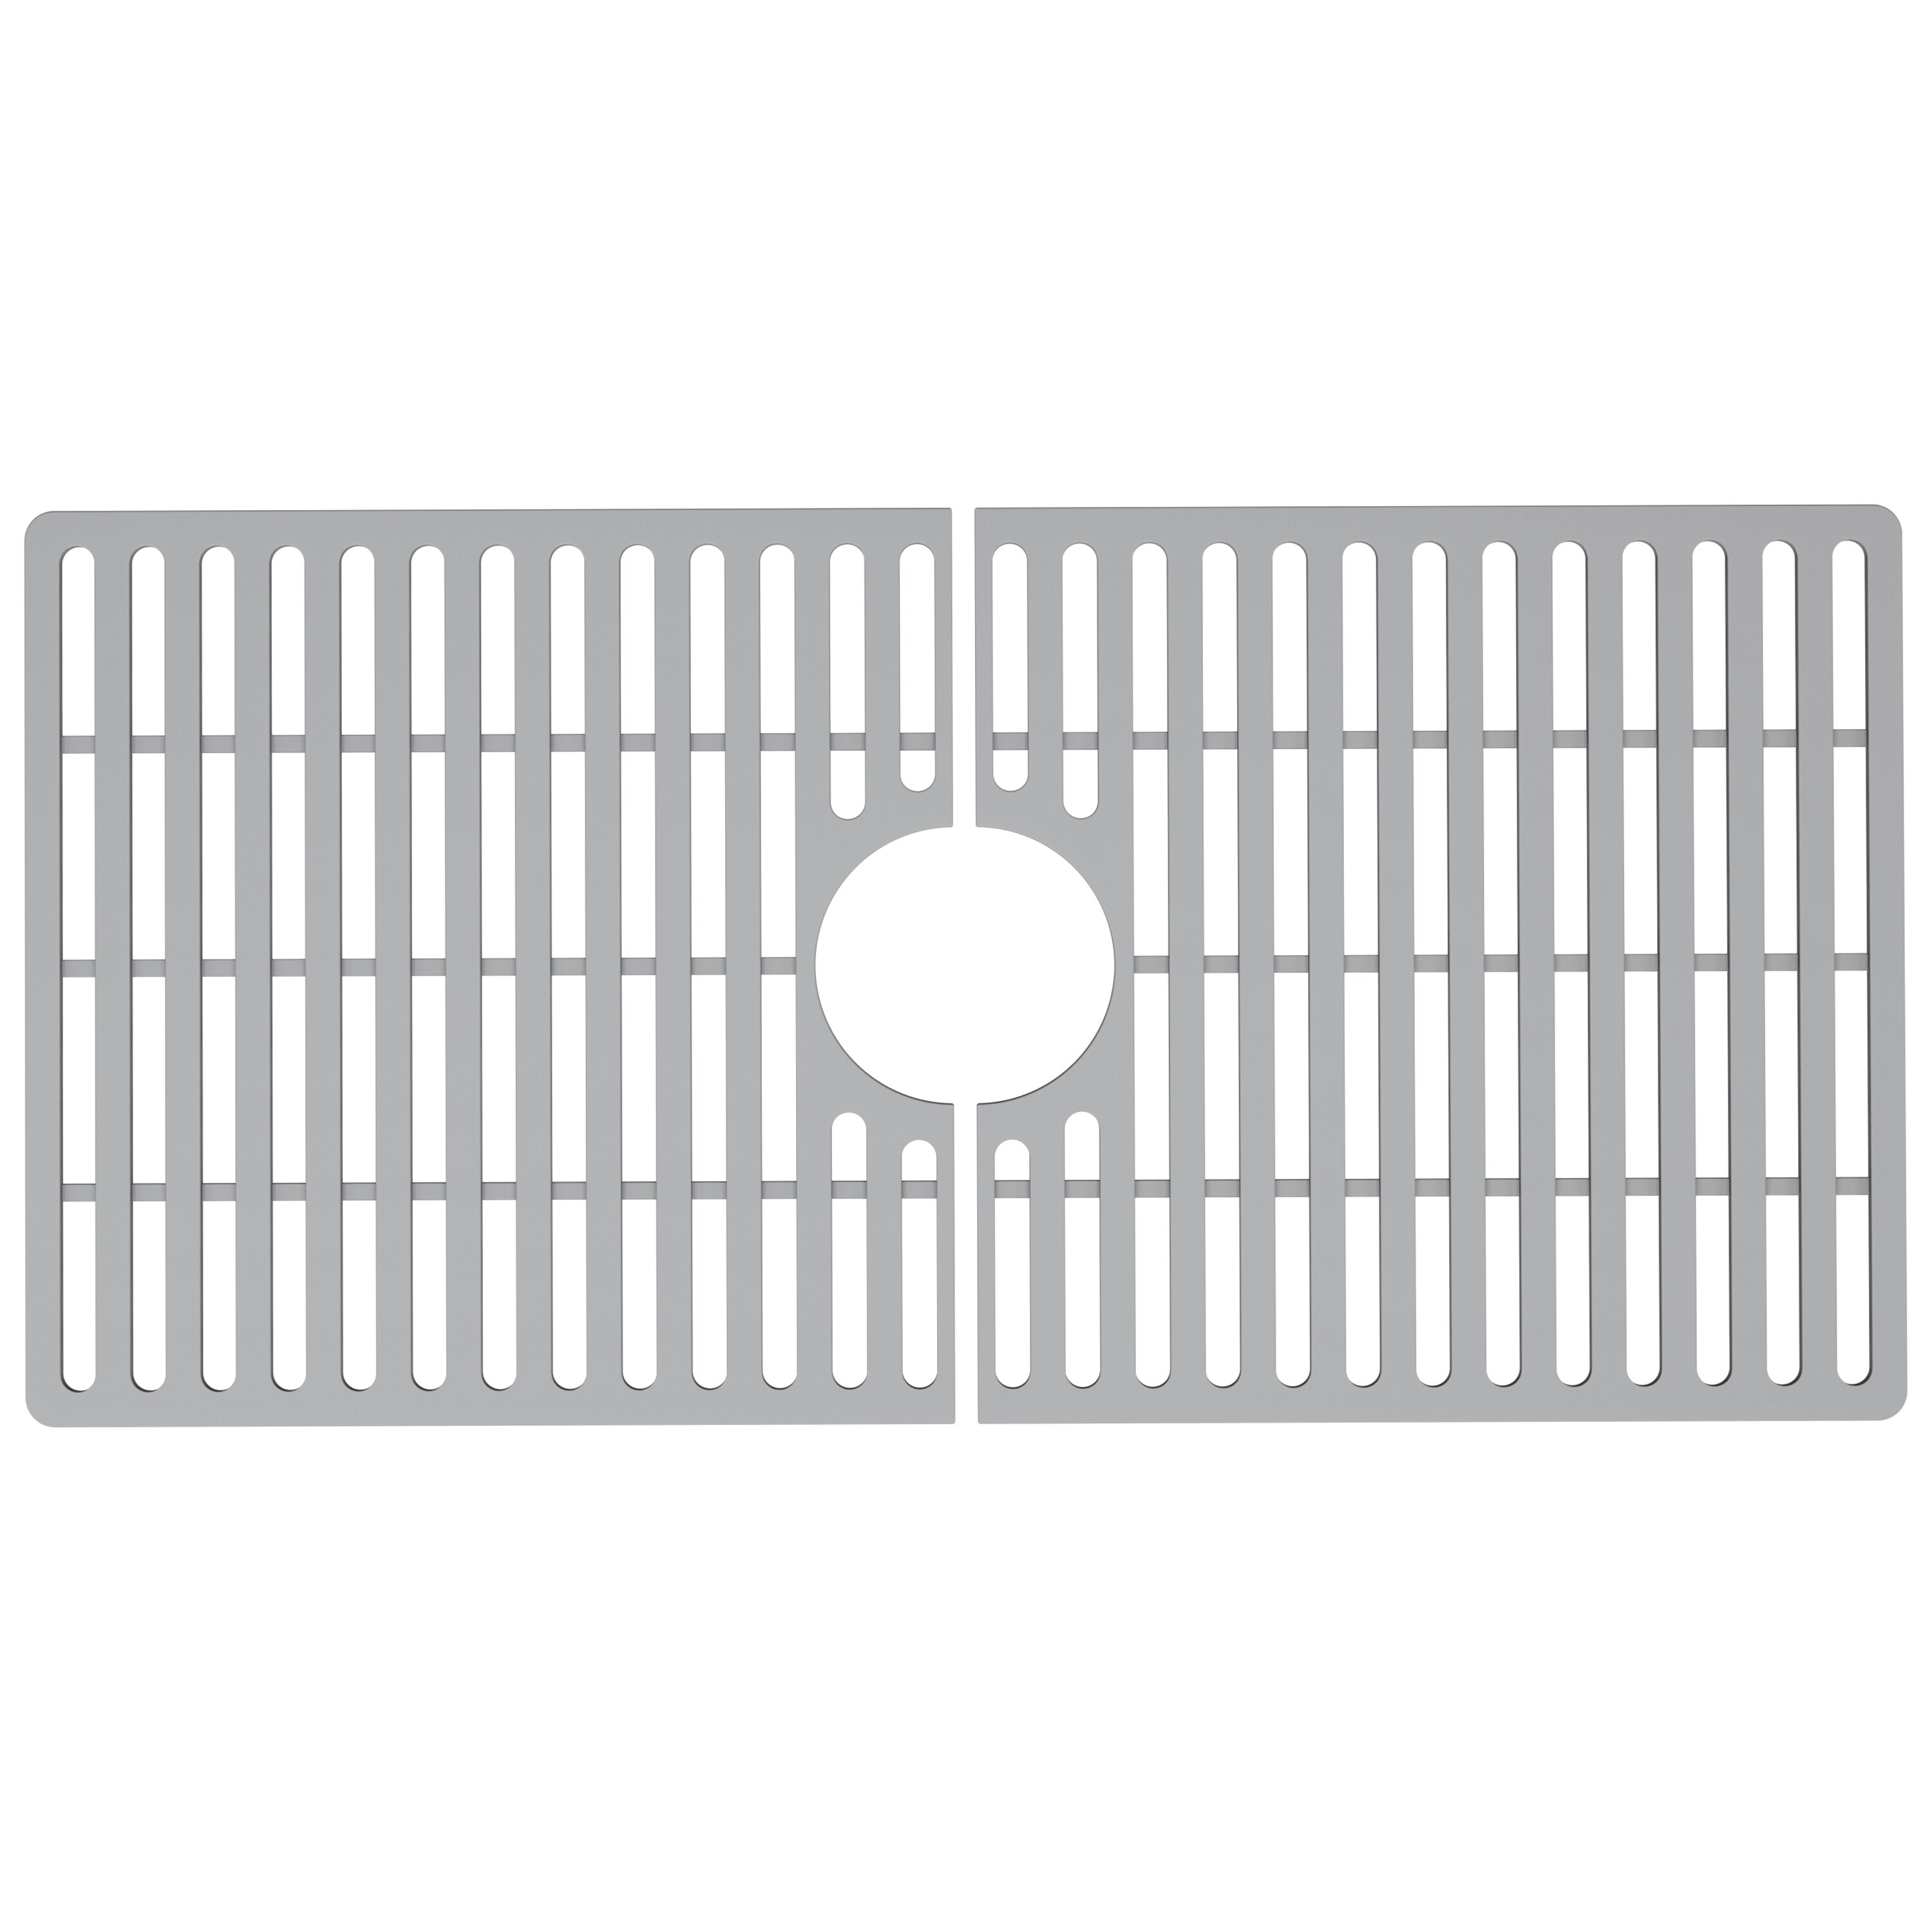 Ruvati Silicone Bottom Grid Sink Mat for RVG1033 and RVG2033 Sinks